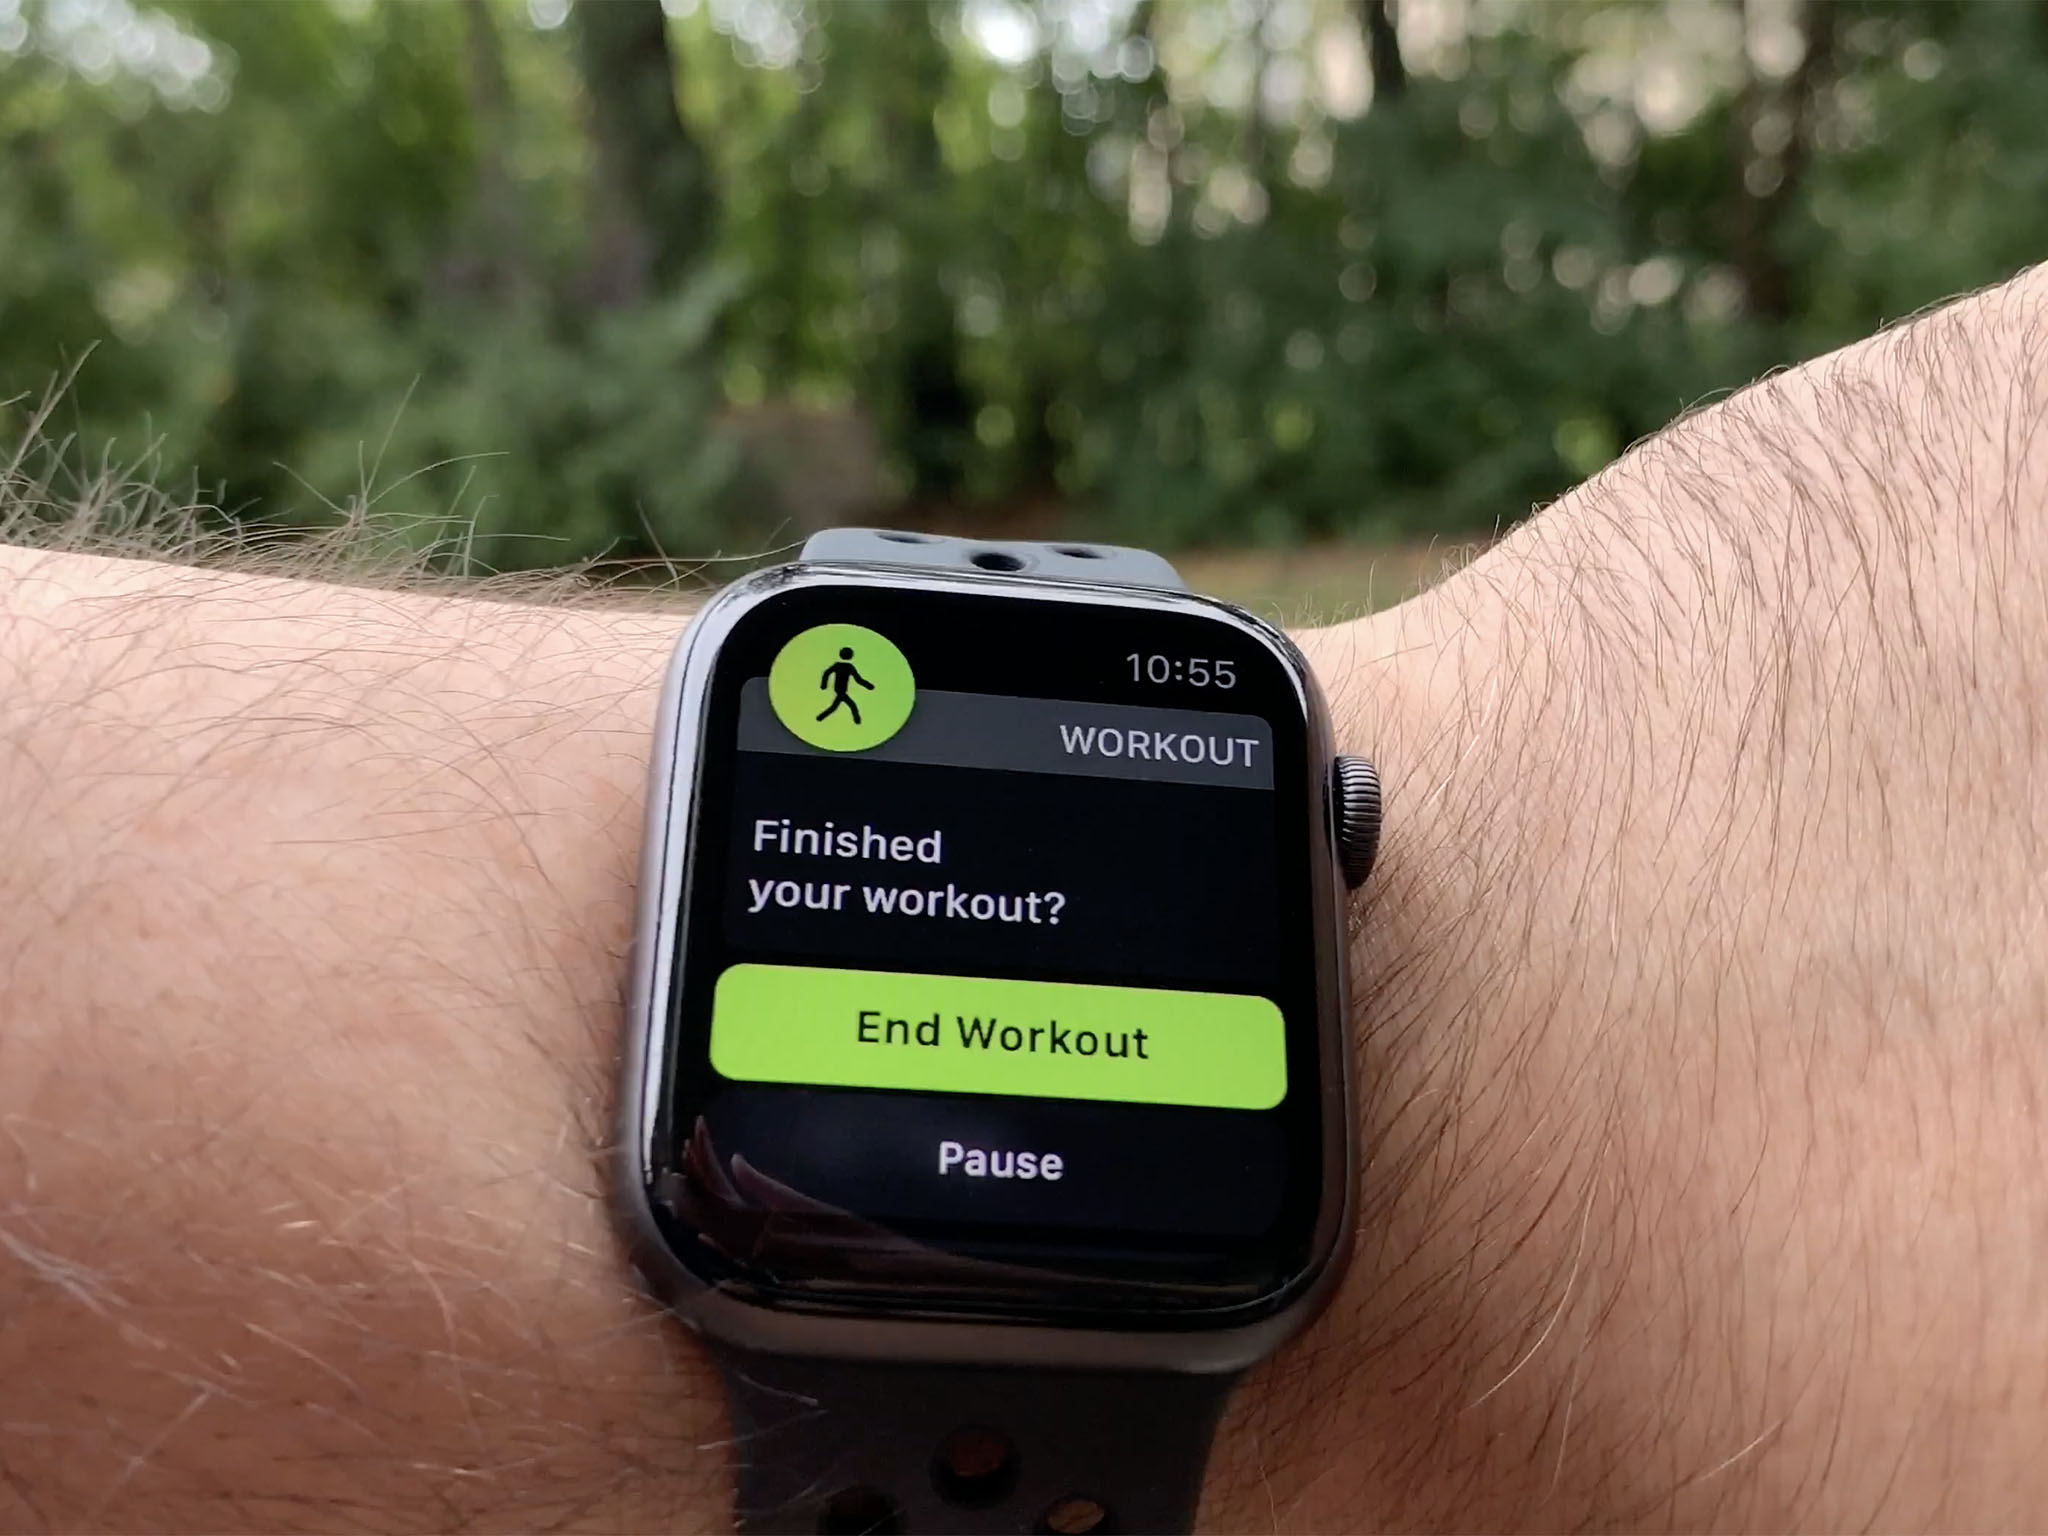 Apple Watch S4 Auto-Detect Workout end